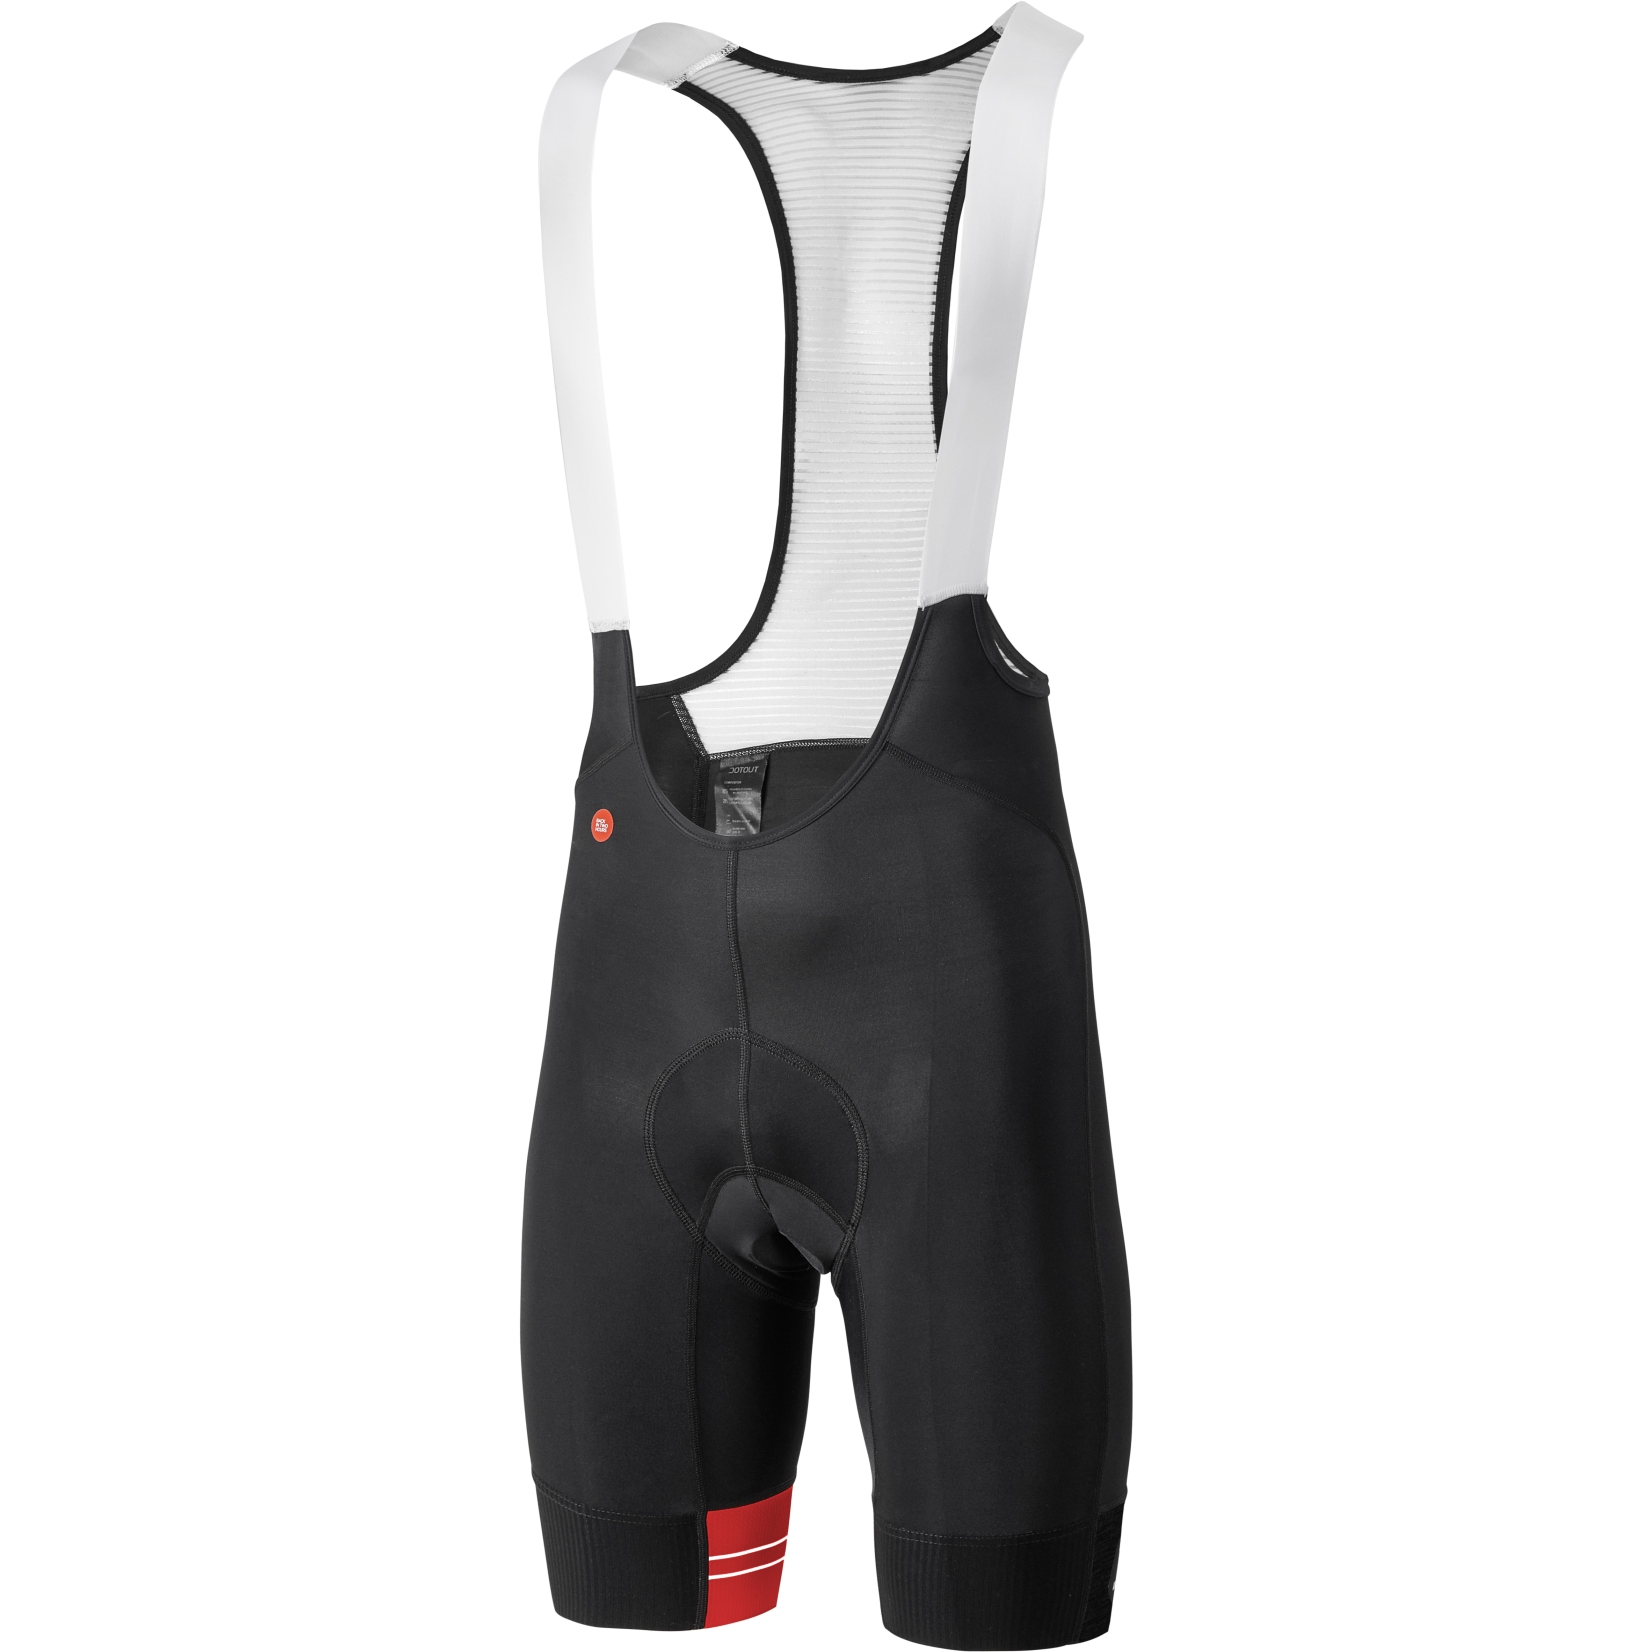 Picture of Dotout Team Bib Shorts - black/red